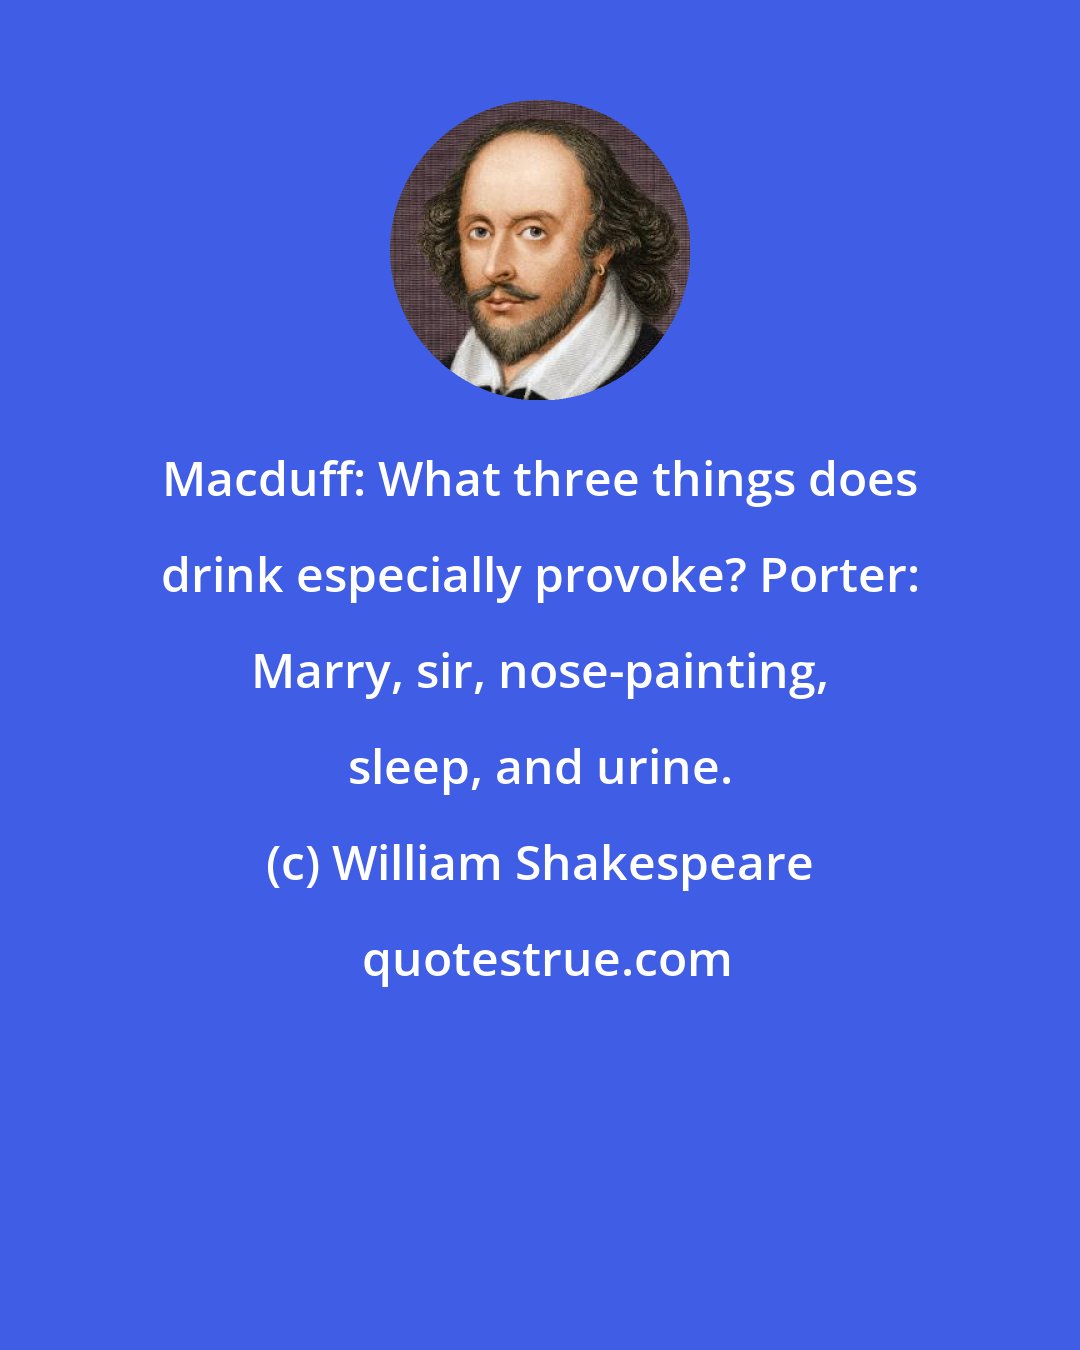 William Shakespeare: Macduff: What three things does drink especially provoke? Porter: Marry, sir, nose-painting, sleep, and urine.